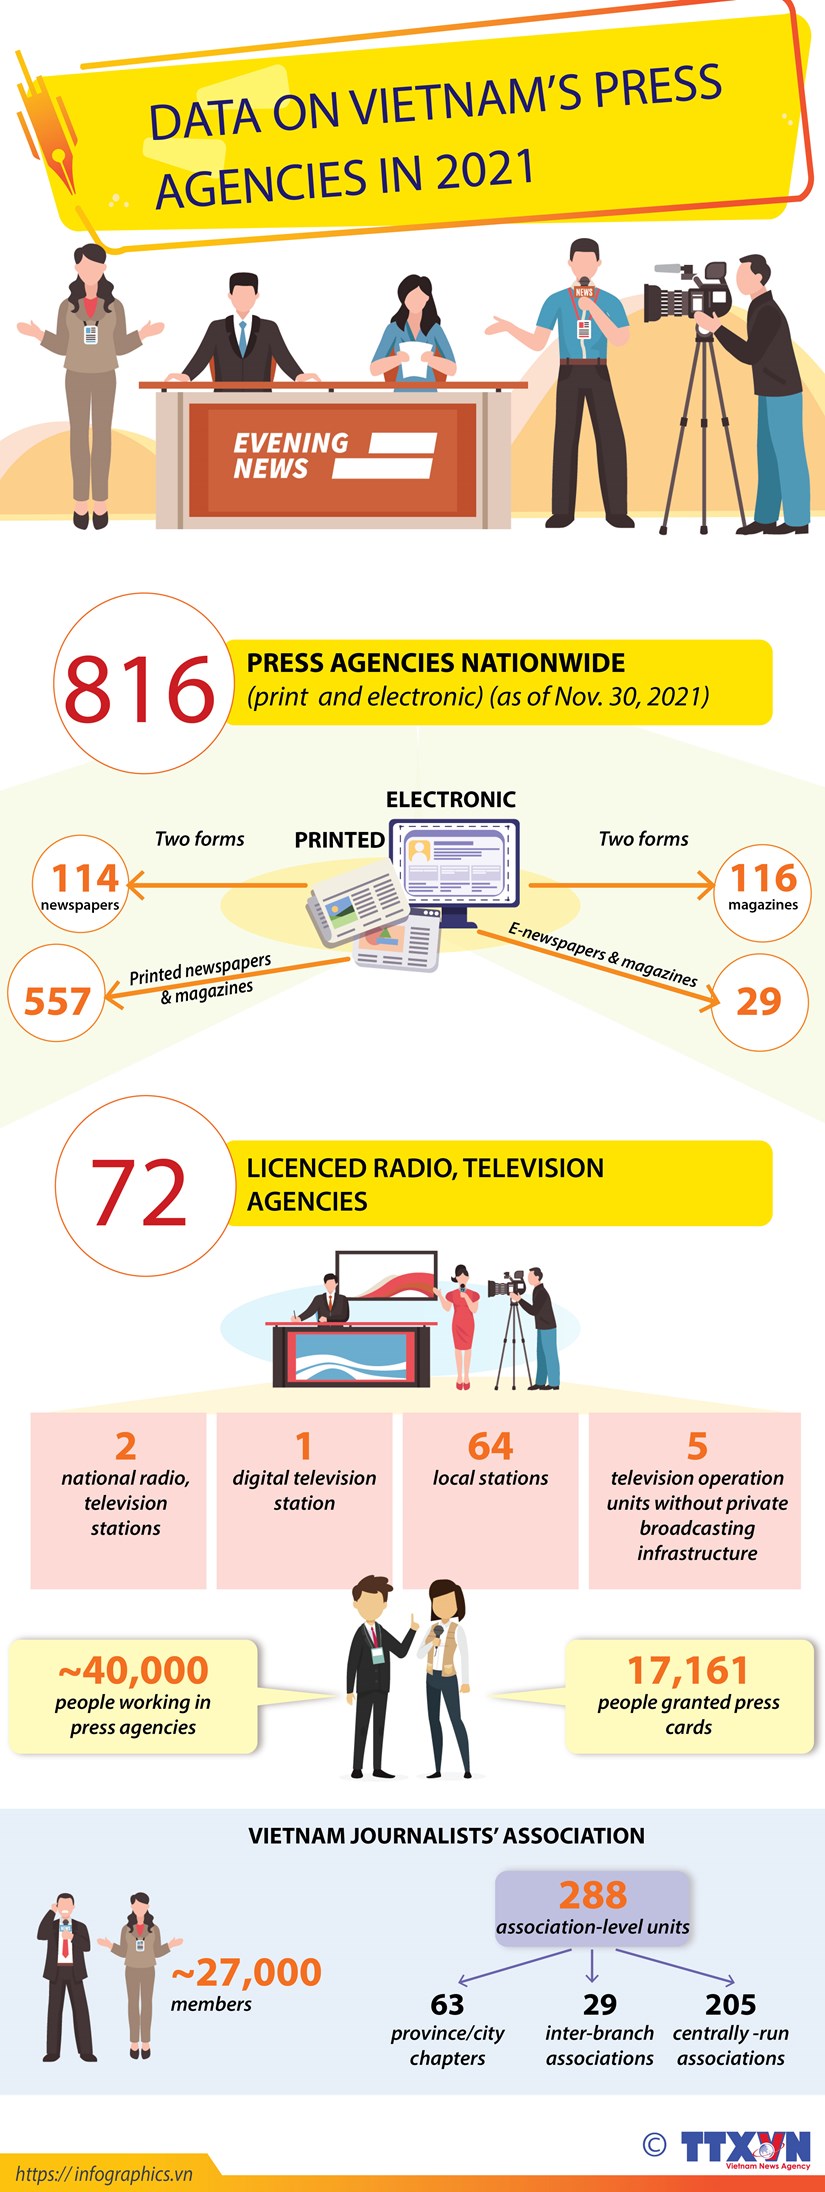 Data on Vietnam's press agencies in 2021 hinh anh 1